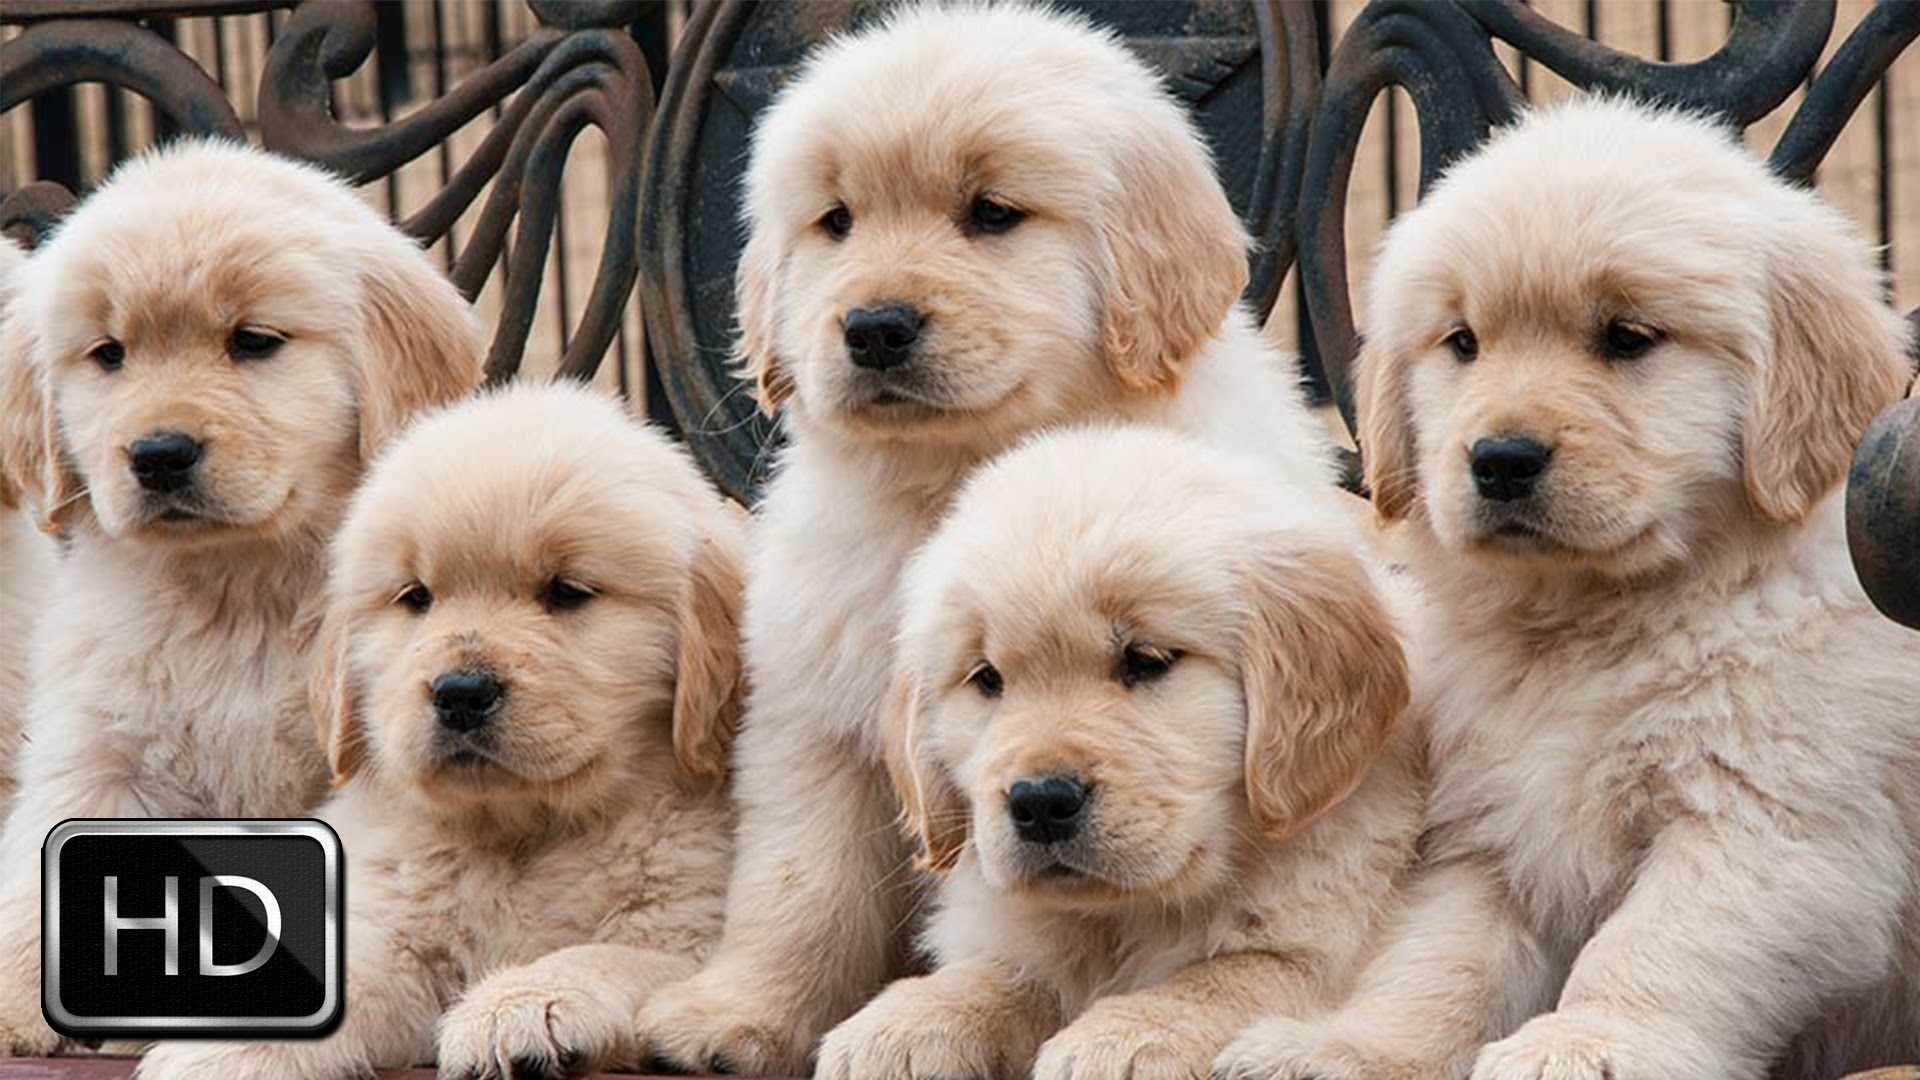 HD Cute Puppies Backgrounds Resolution 1920x1080